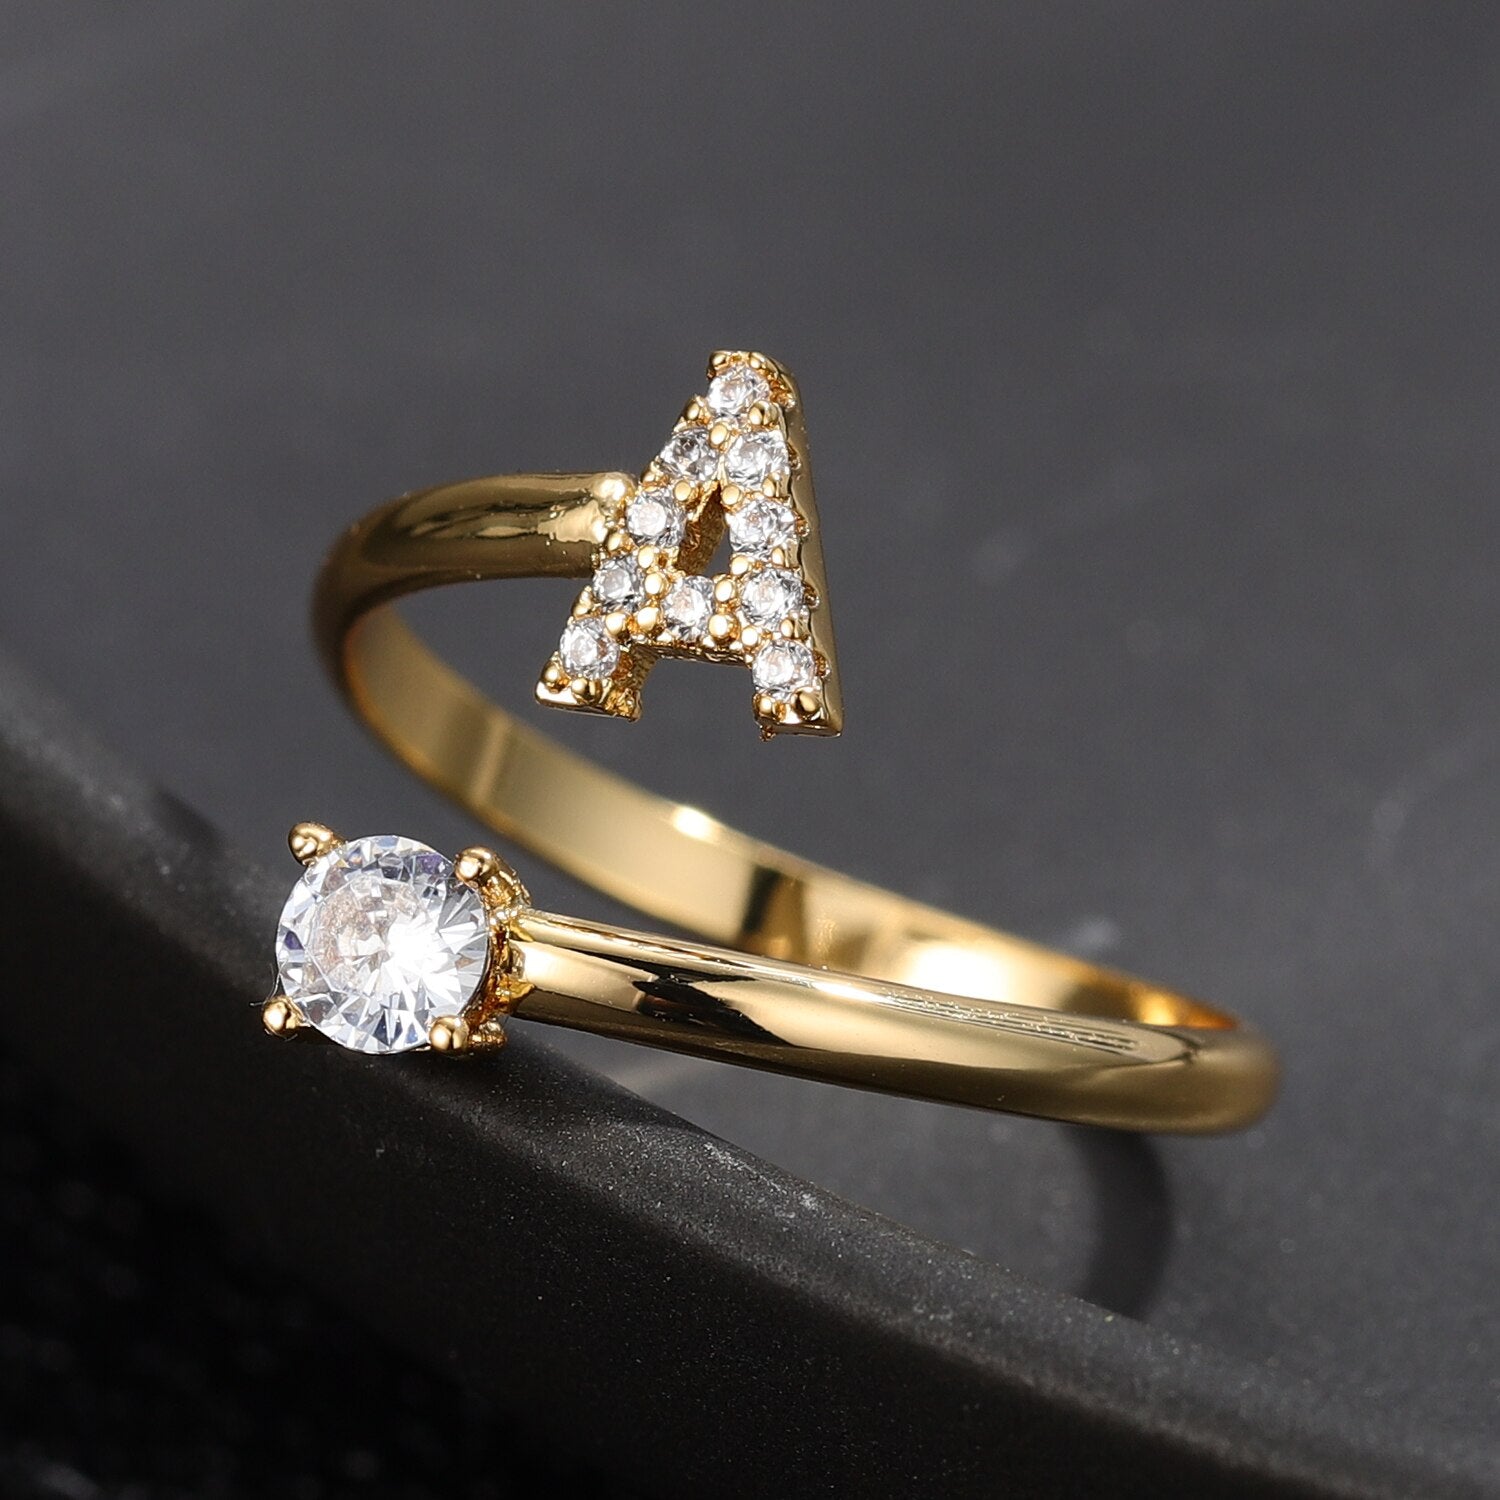 Beautiful #Letter #gold ring design||#Alphabet #gold ring design||#Lates...  | Gold ring designs, Ring designs, Gold rings